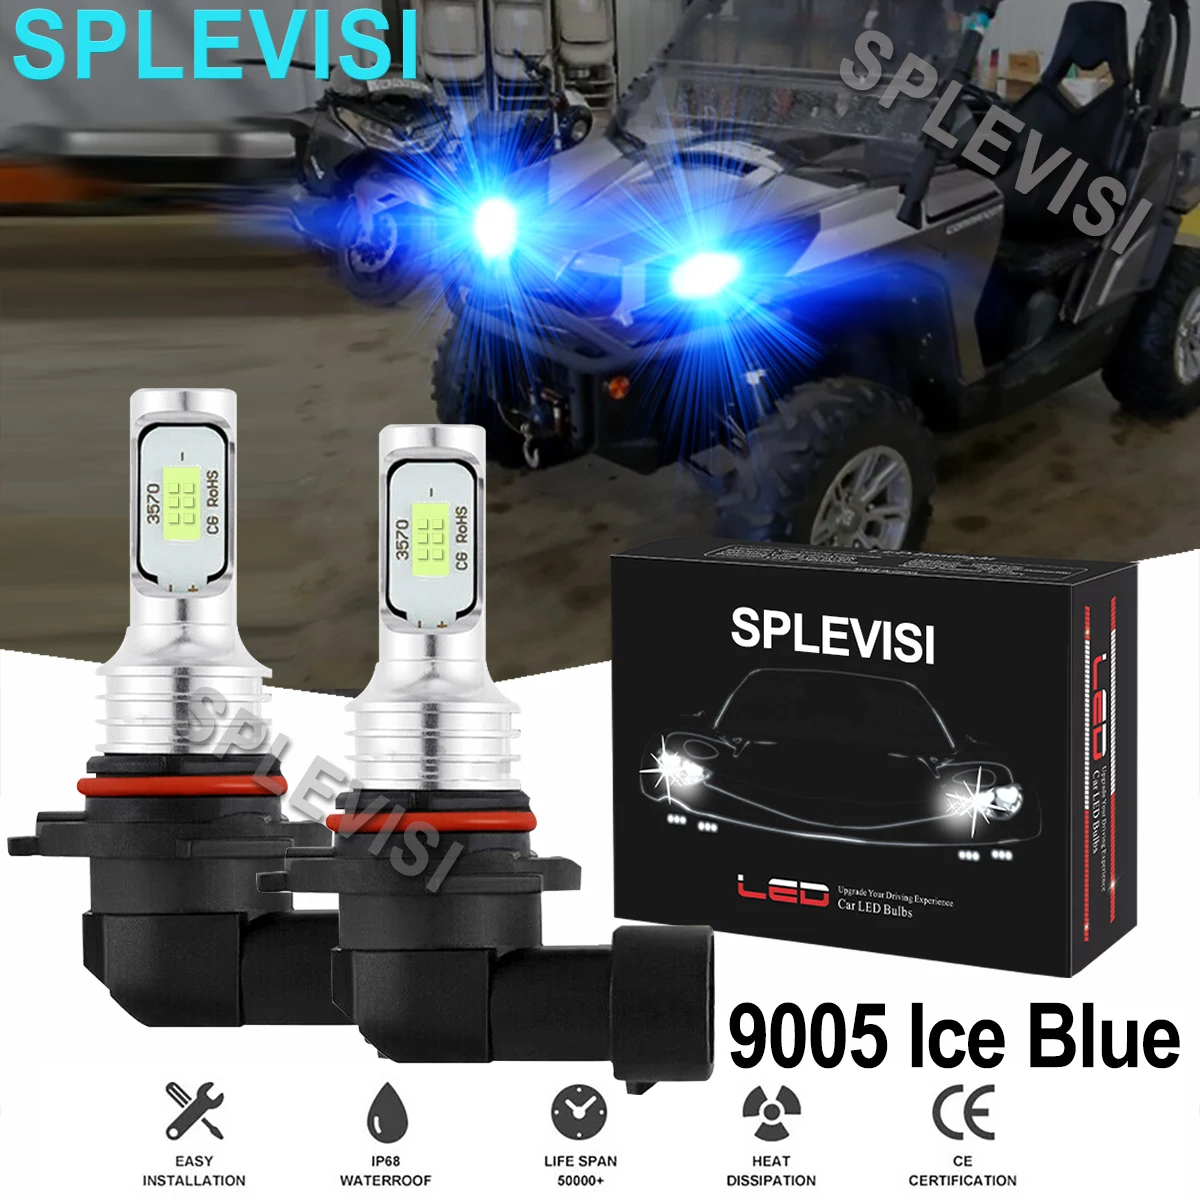 2x70W 8000K Ice Blue LED 9005 Headlights For Can-Am Commander 800 2011-2015 800R 2012-2013 Max 1000 2014-2017 Max 800R 2018-2019